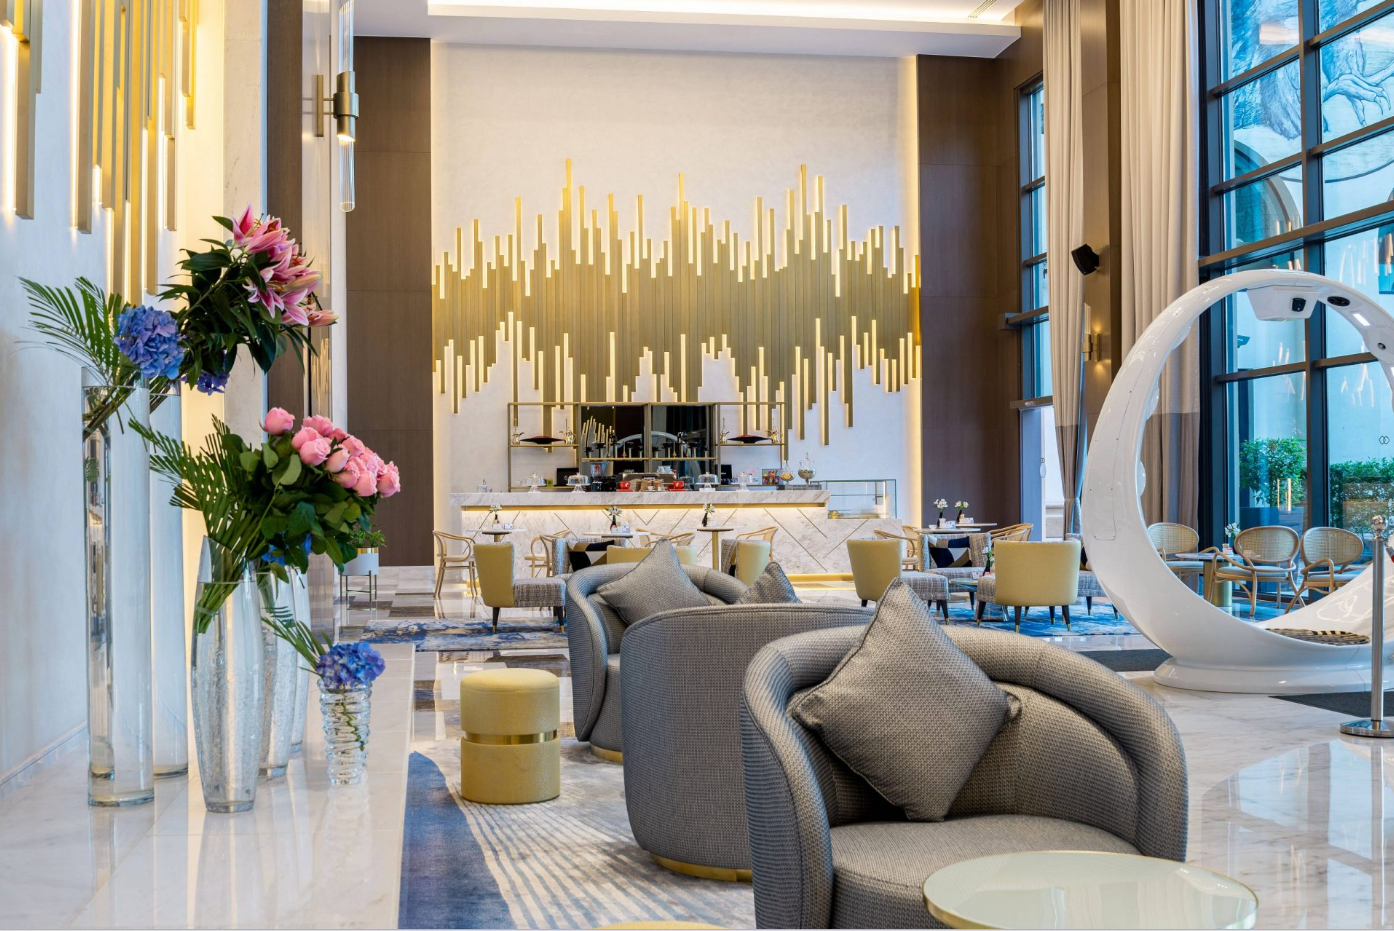 Dubai based Mouhajer International Design and Contracting sets the standard in luxury interior design